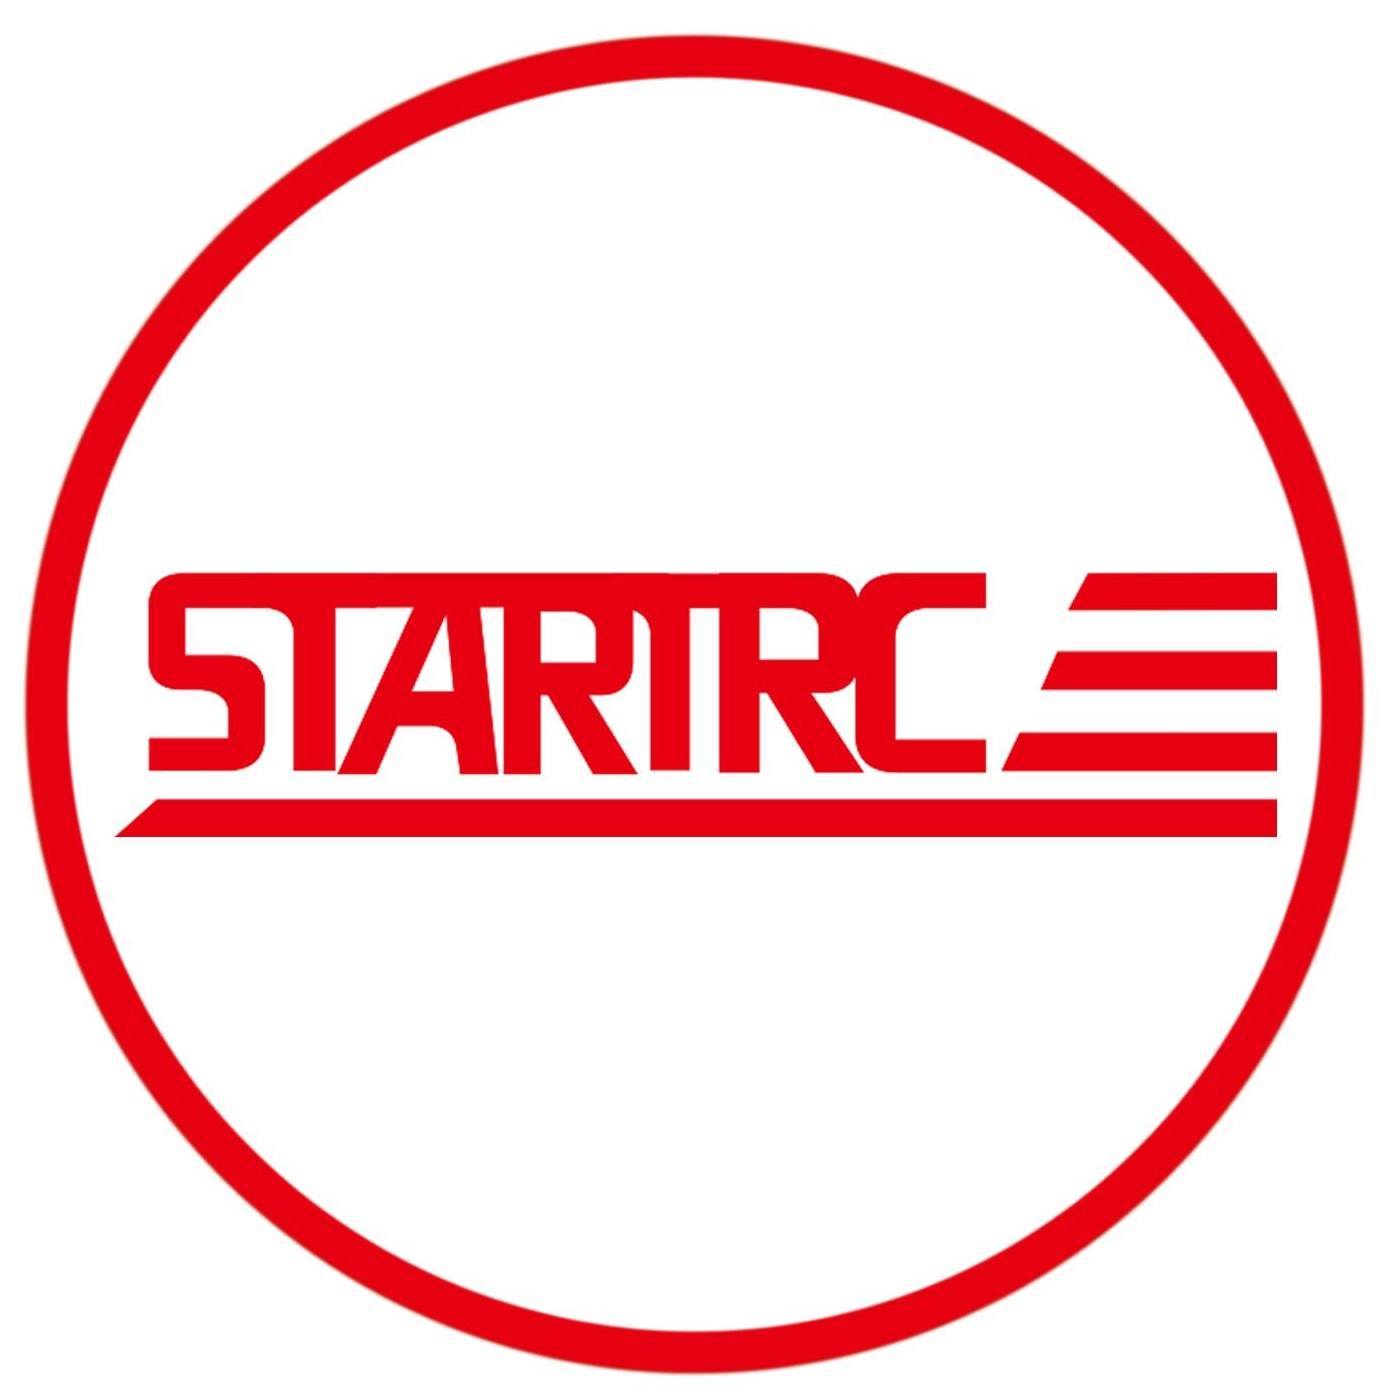 STARTRC DJI Drone and Action Camera accessories